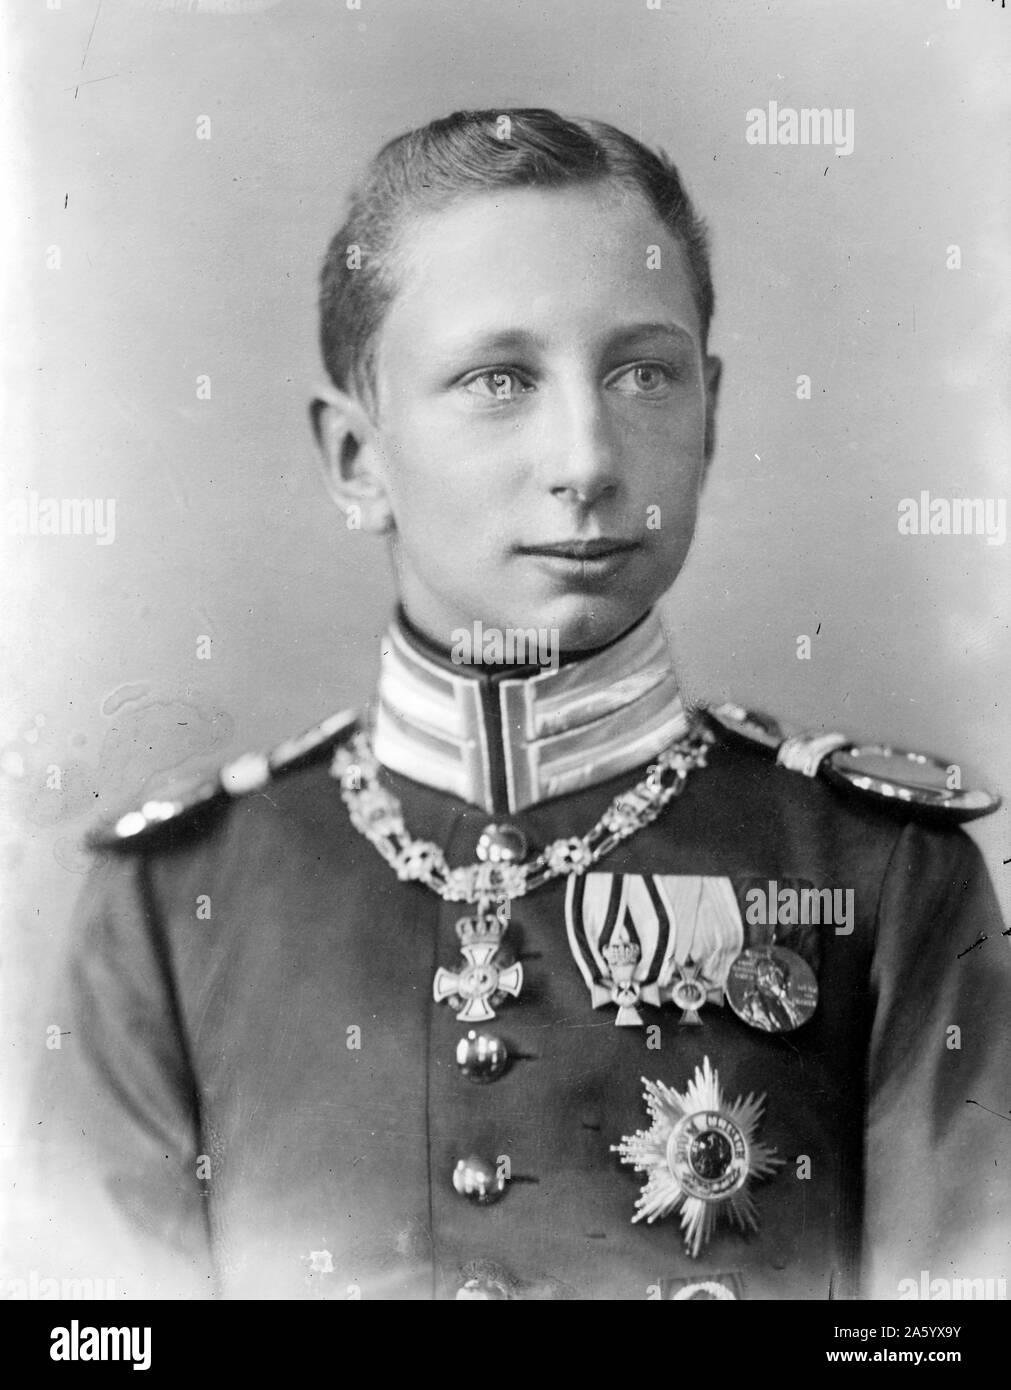 Photographic portrait of Prince Joachim of Prussia (1890-1920) Prince Joachim Franz Humbert of Prussia was the youngest son of Wilhelm II, German Emperor, by his first wife, Augusta Victoria of Schleswig-Holstein. Dated 1916 Stock Photo